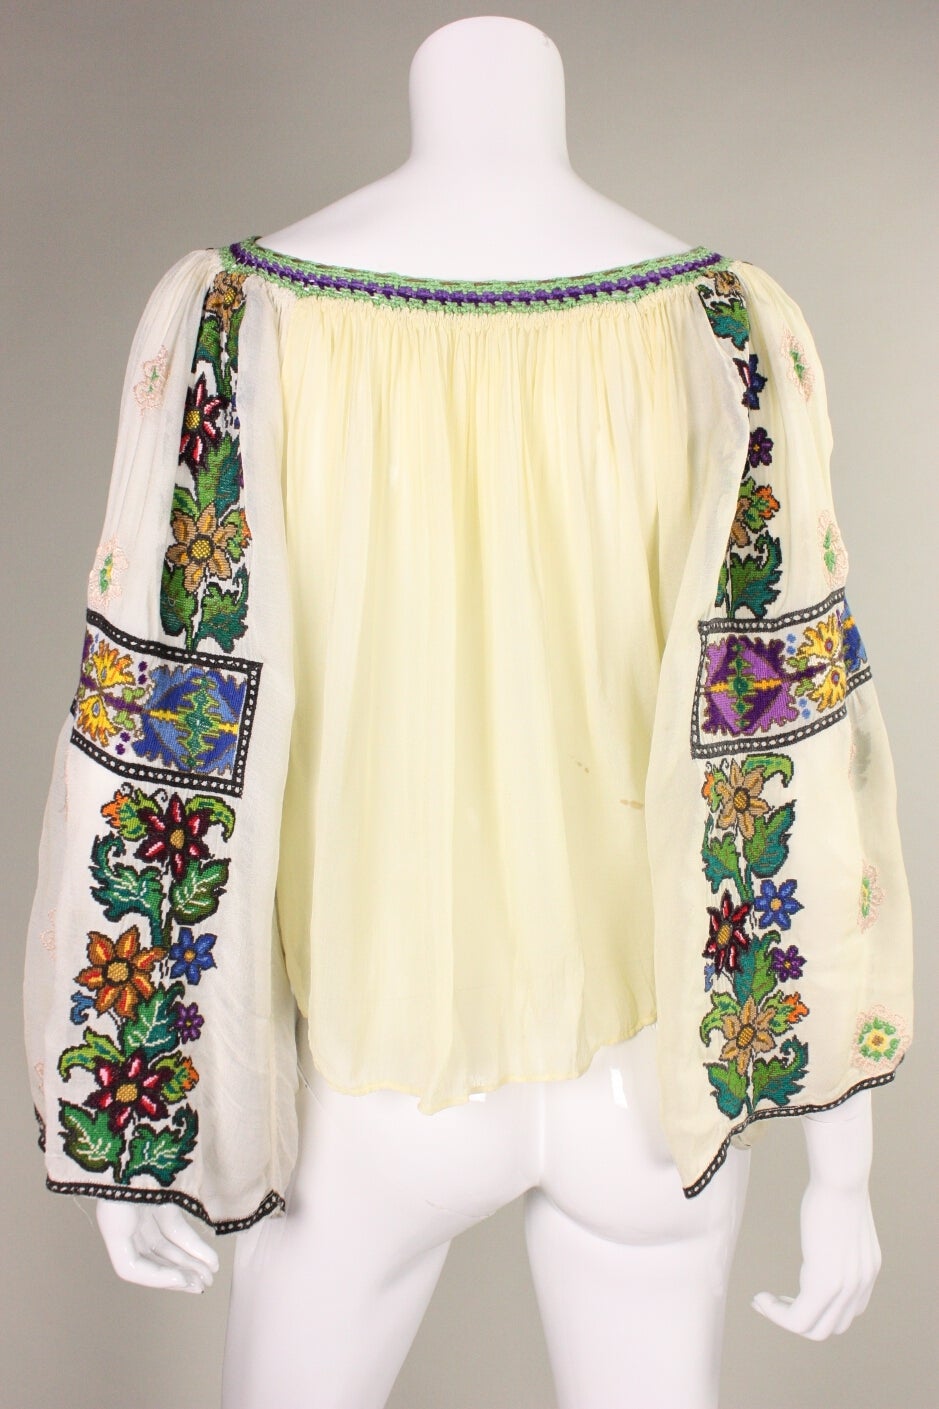 Women's 1930's Eastern European Embroidered Blouse